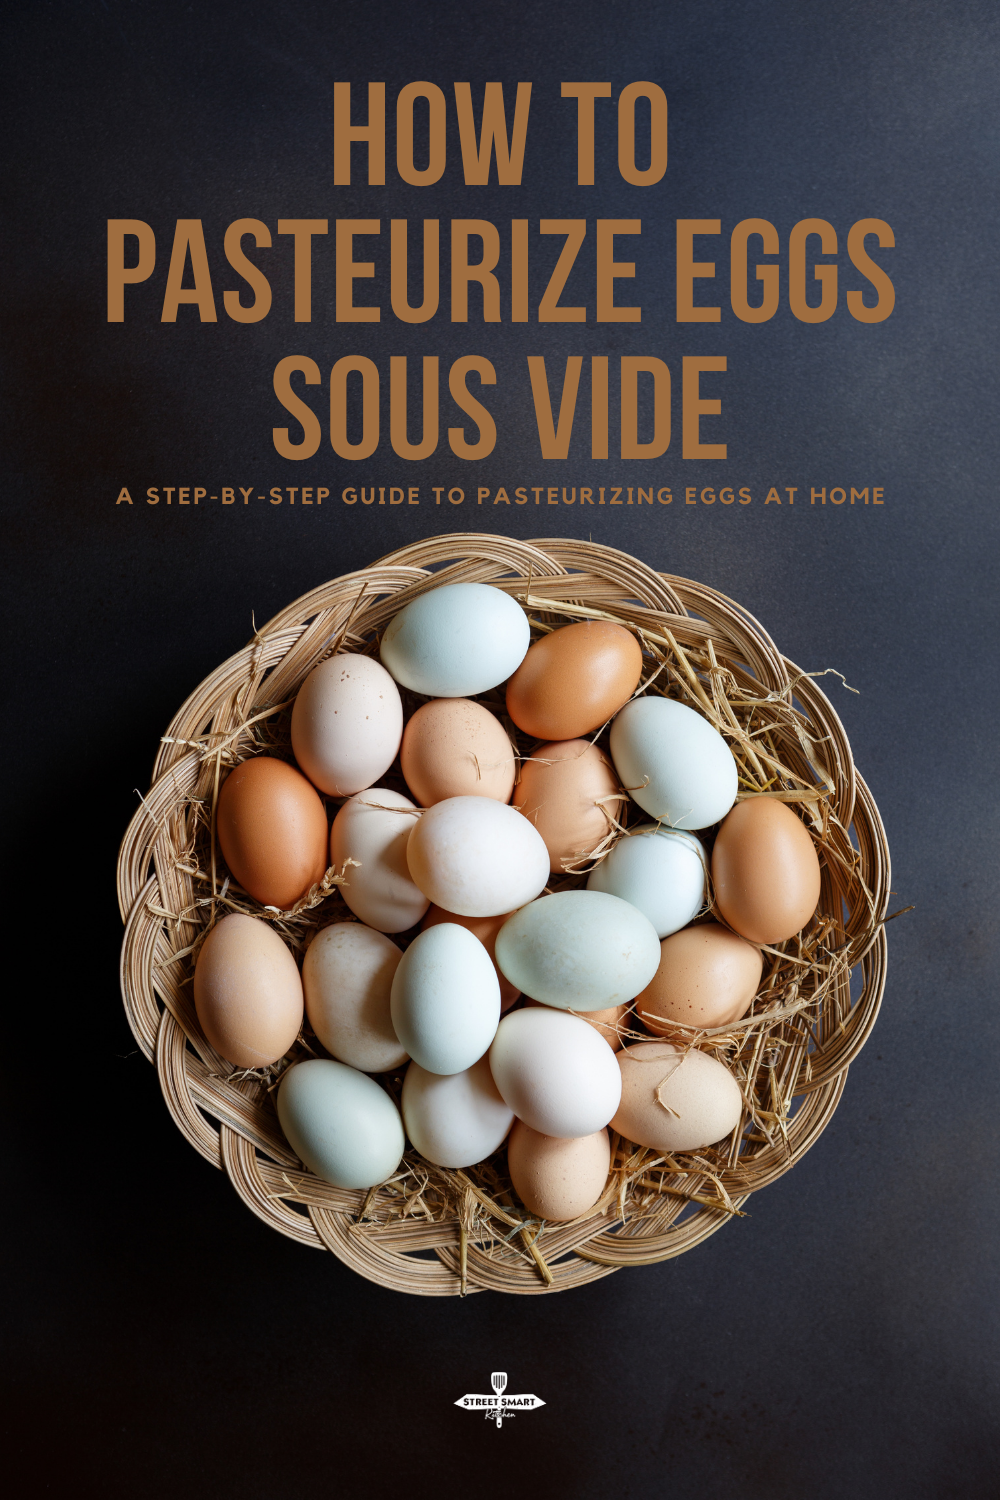 How to pasteurize eggs sous vide